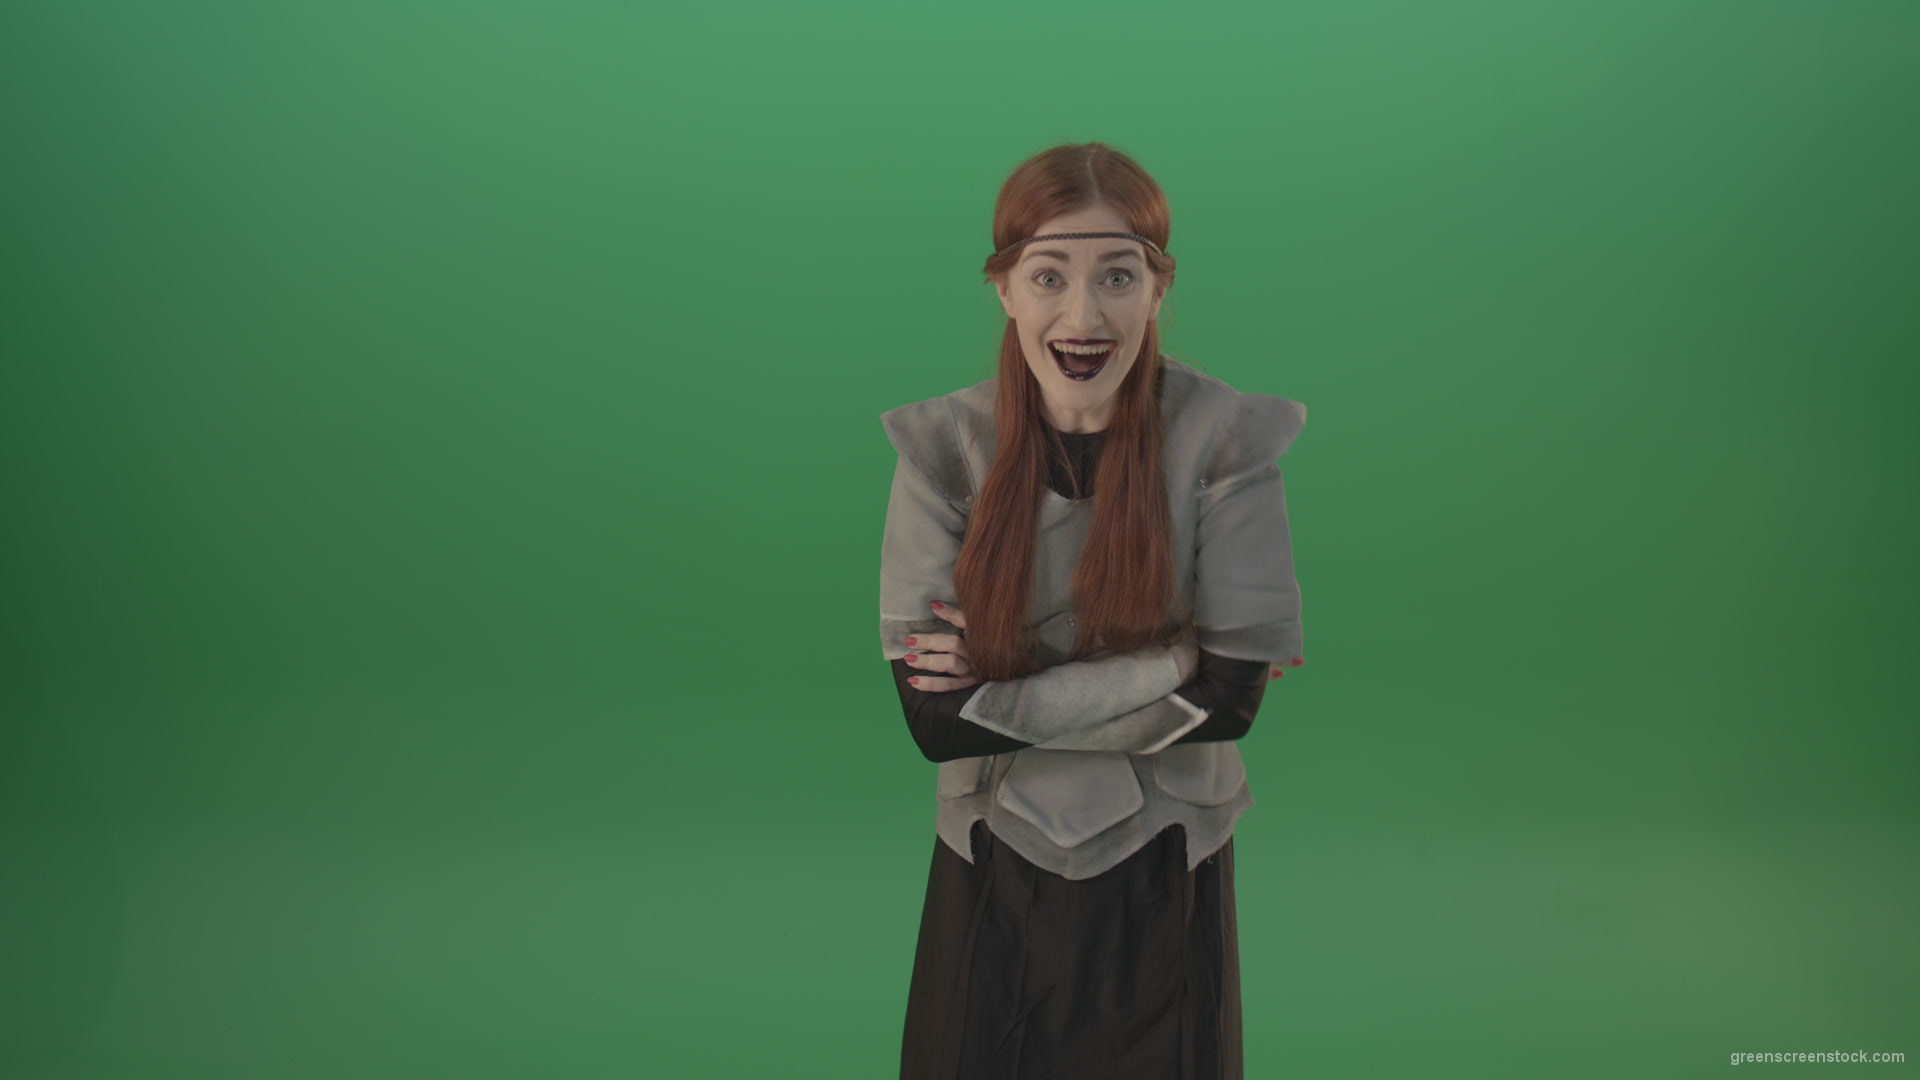 Girl-in-a-medieval-wig-costume-laughs-on-a-green-background-1_008 Green Screen Stock